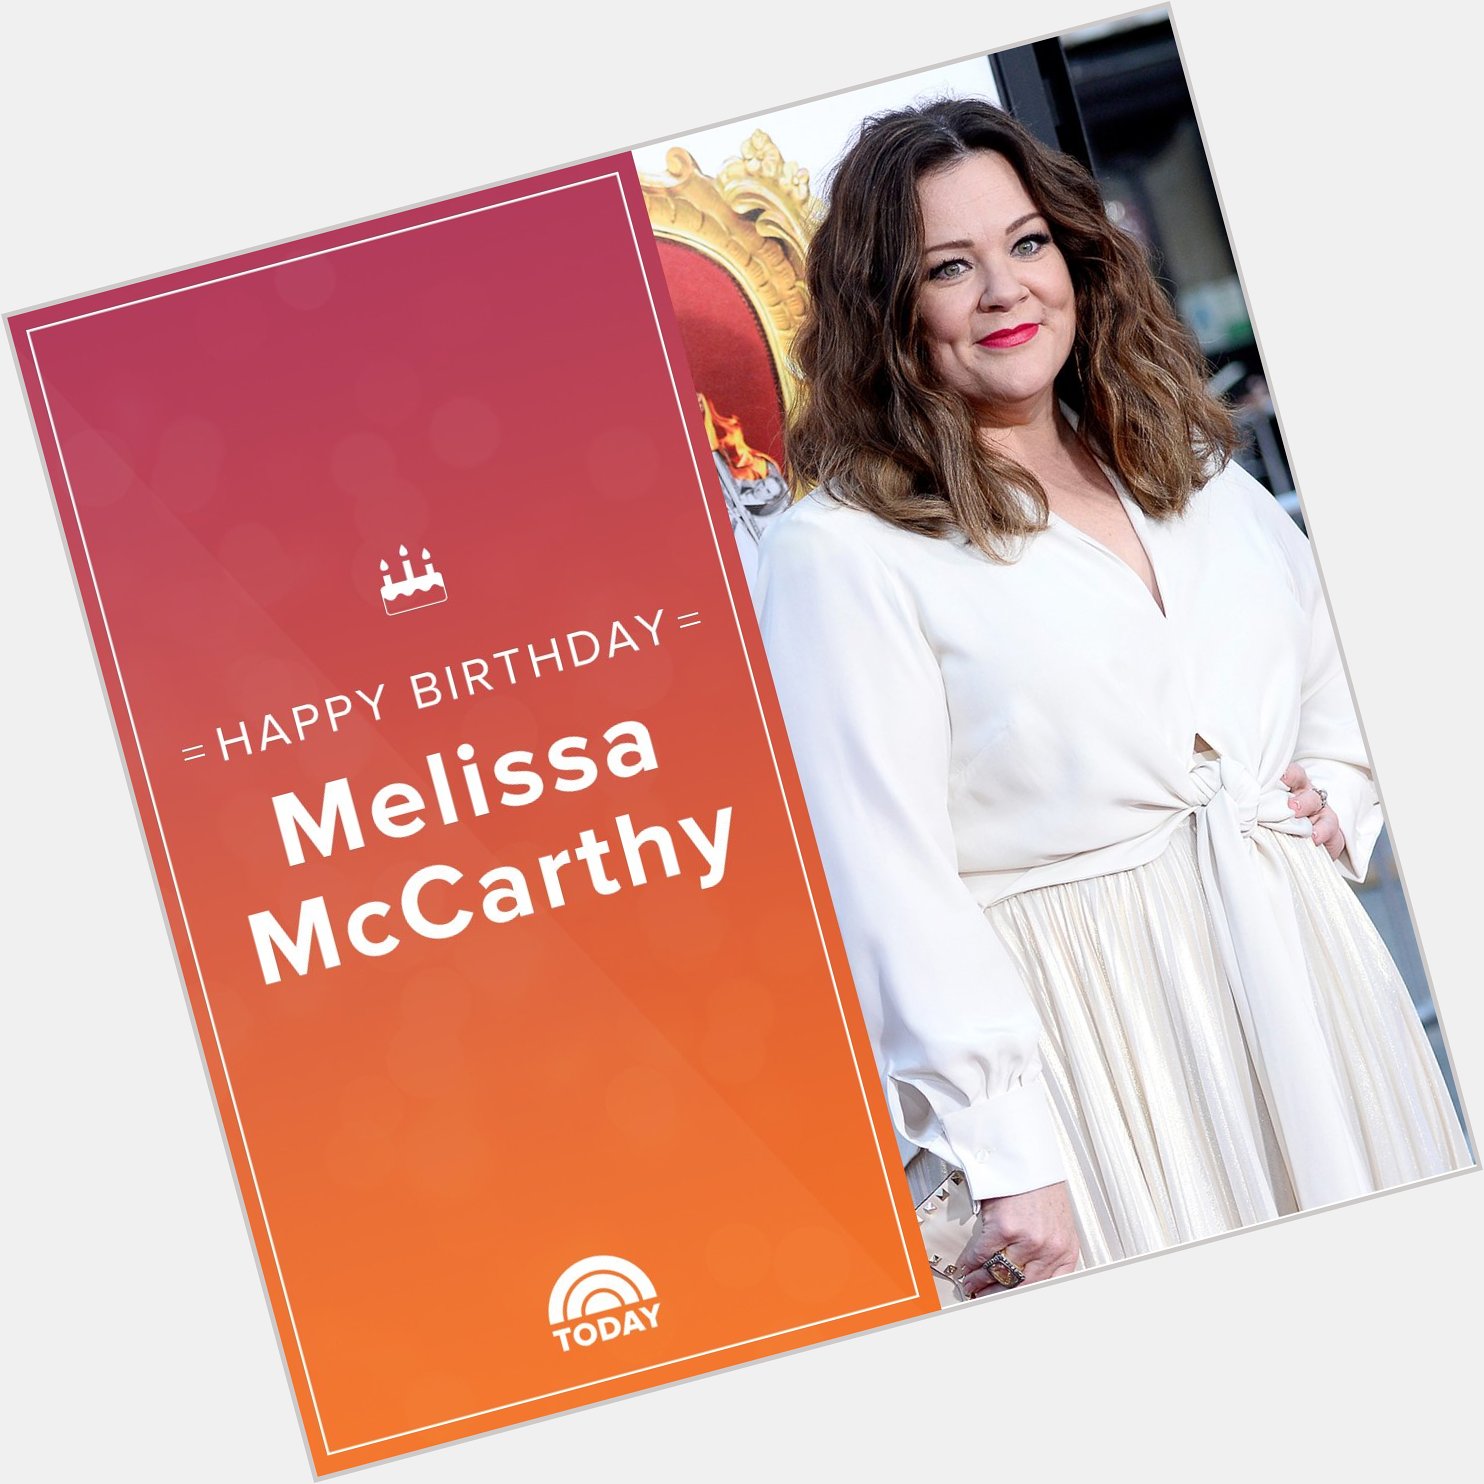 Happy birthday to the hilarious, talented Melissa McCarthy!  